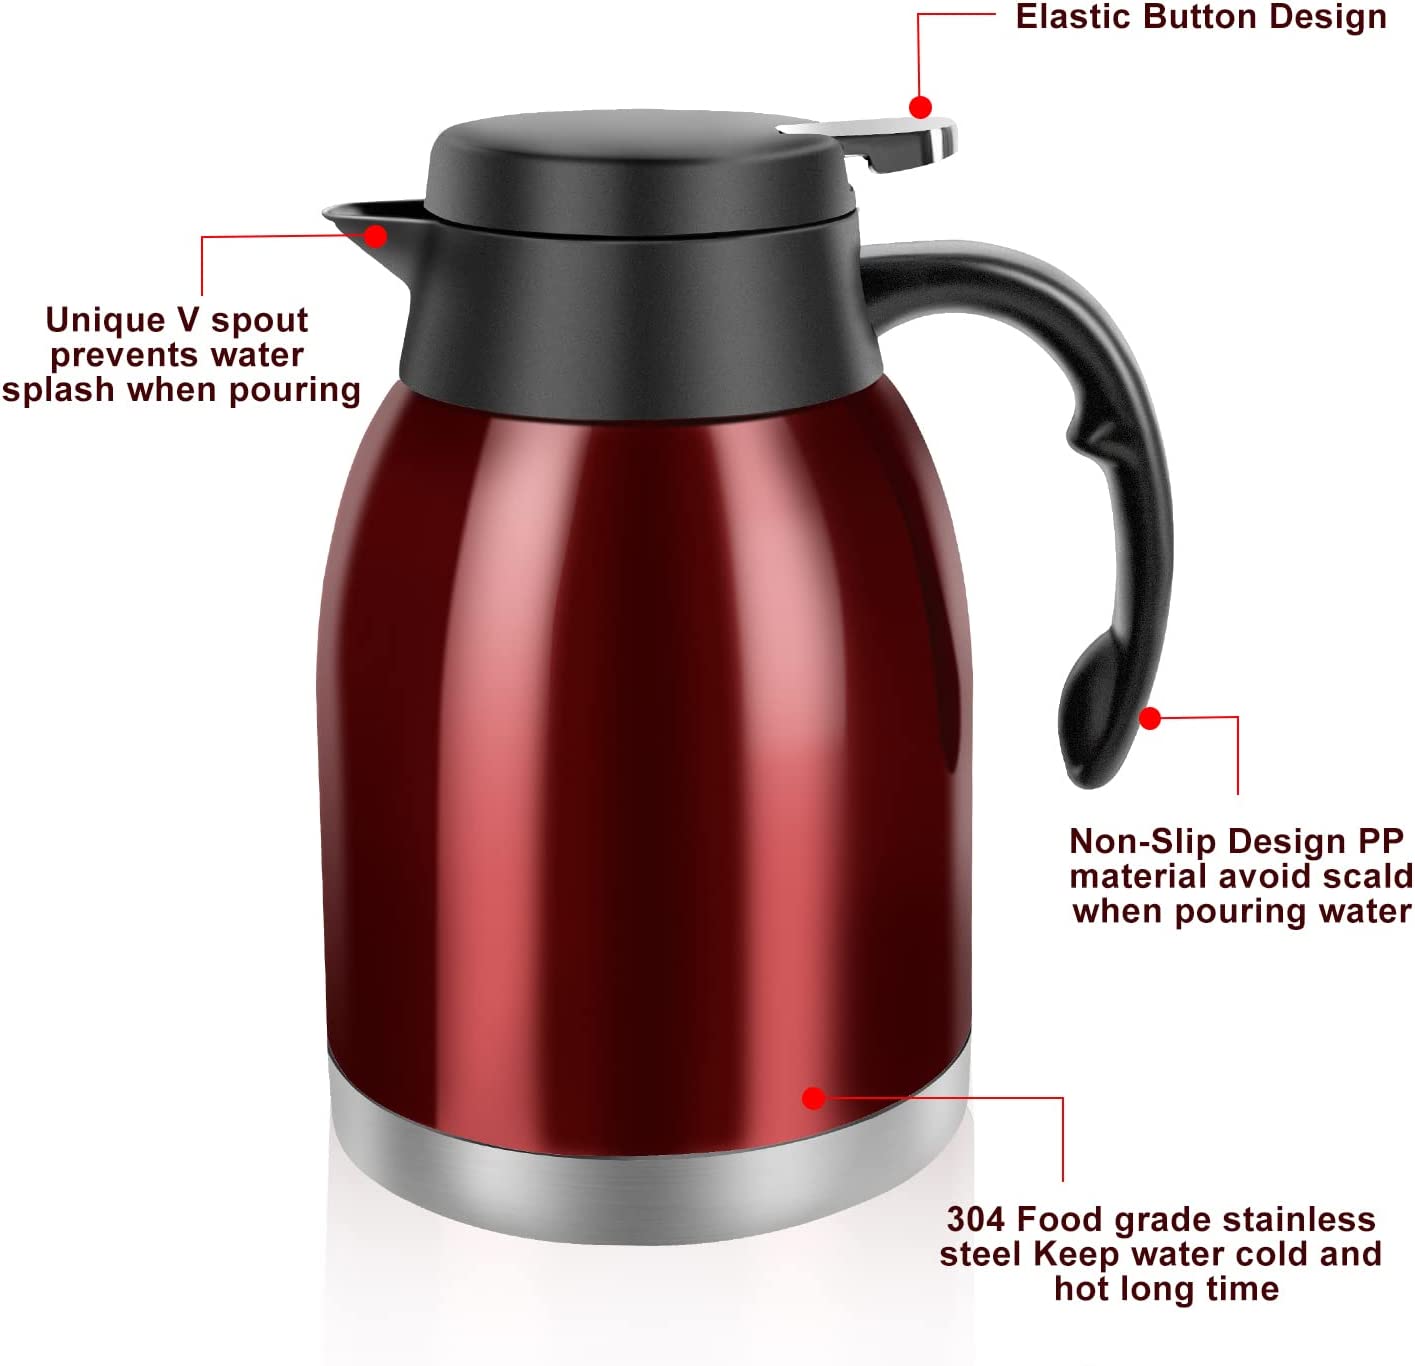  Large Coffee Thermos for Hot Drinks Stainless Steel